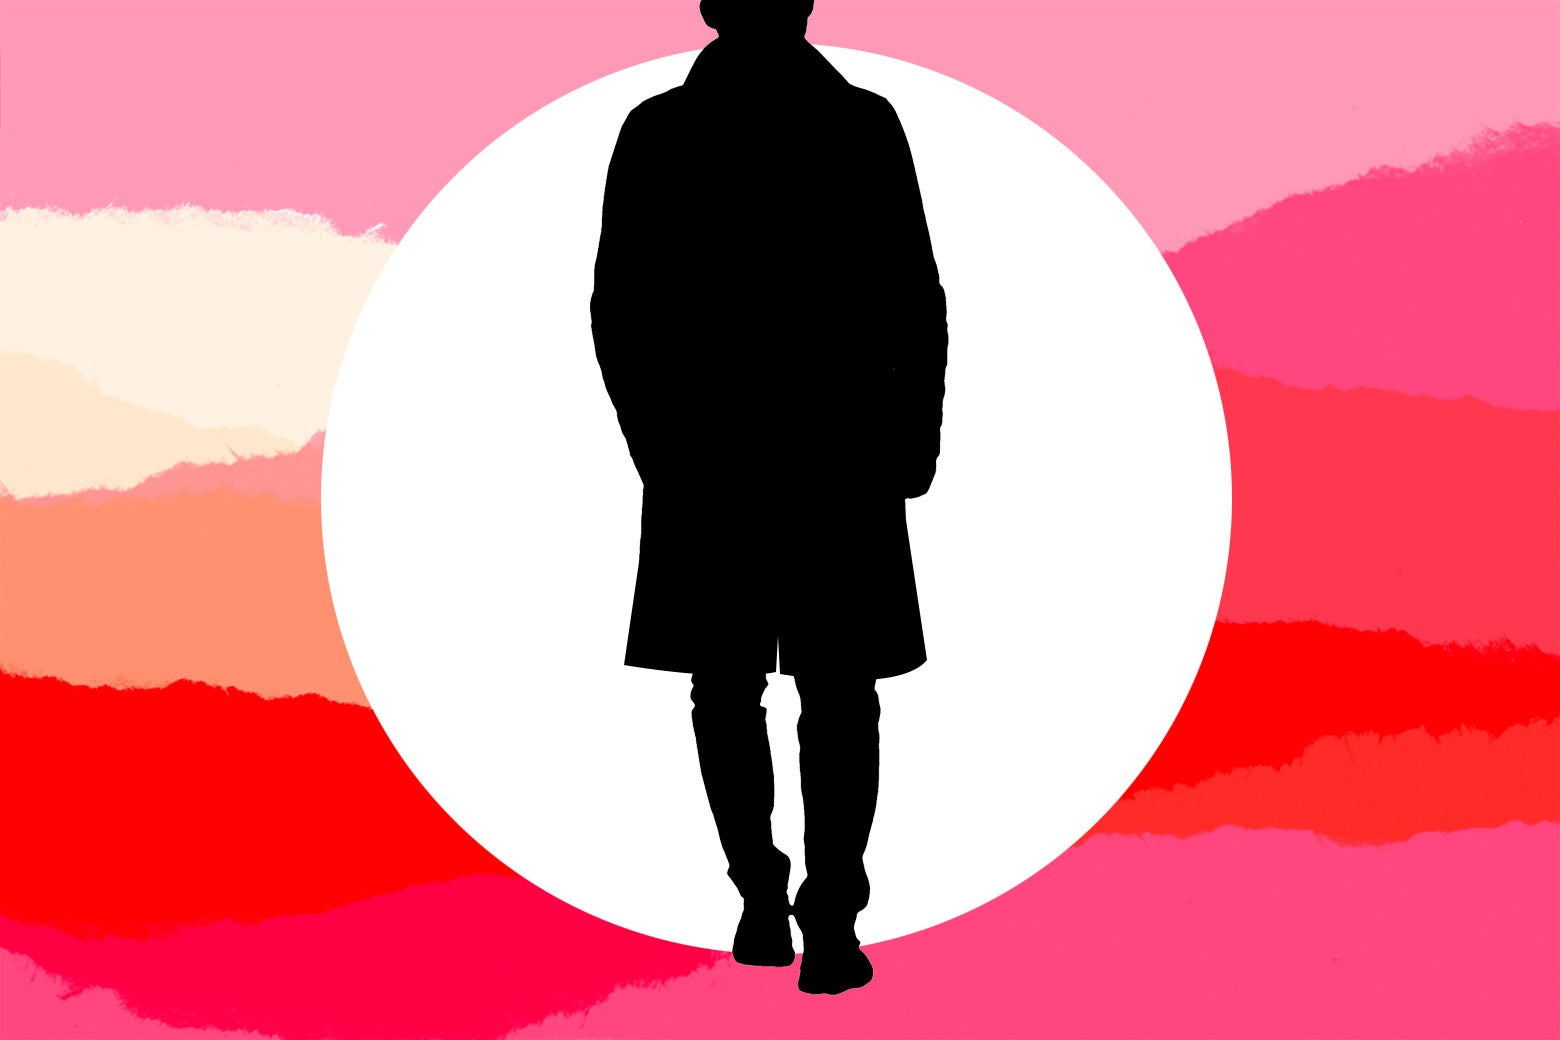 A silhouette of a figure in a trenchcoat.